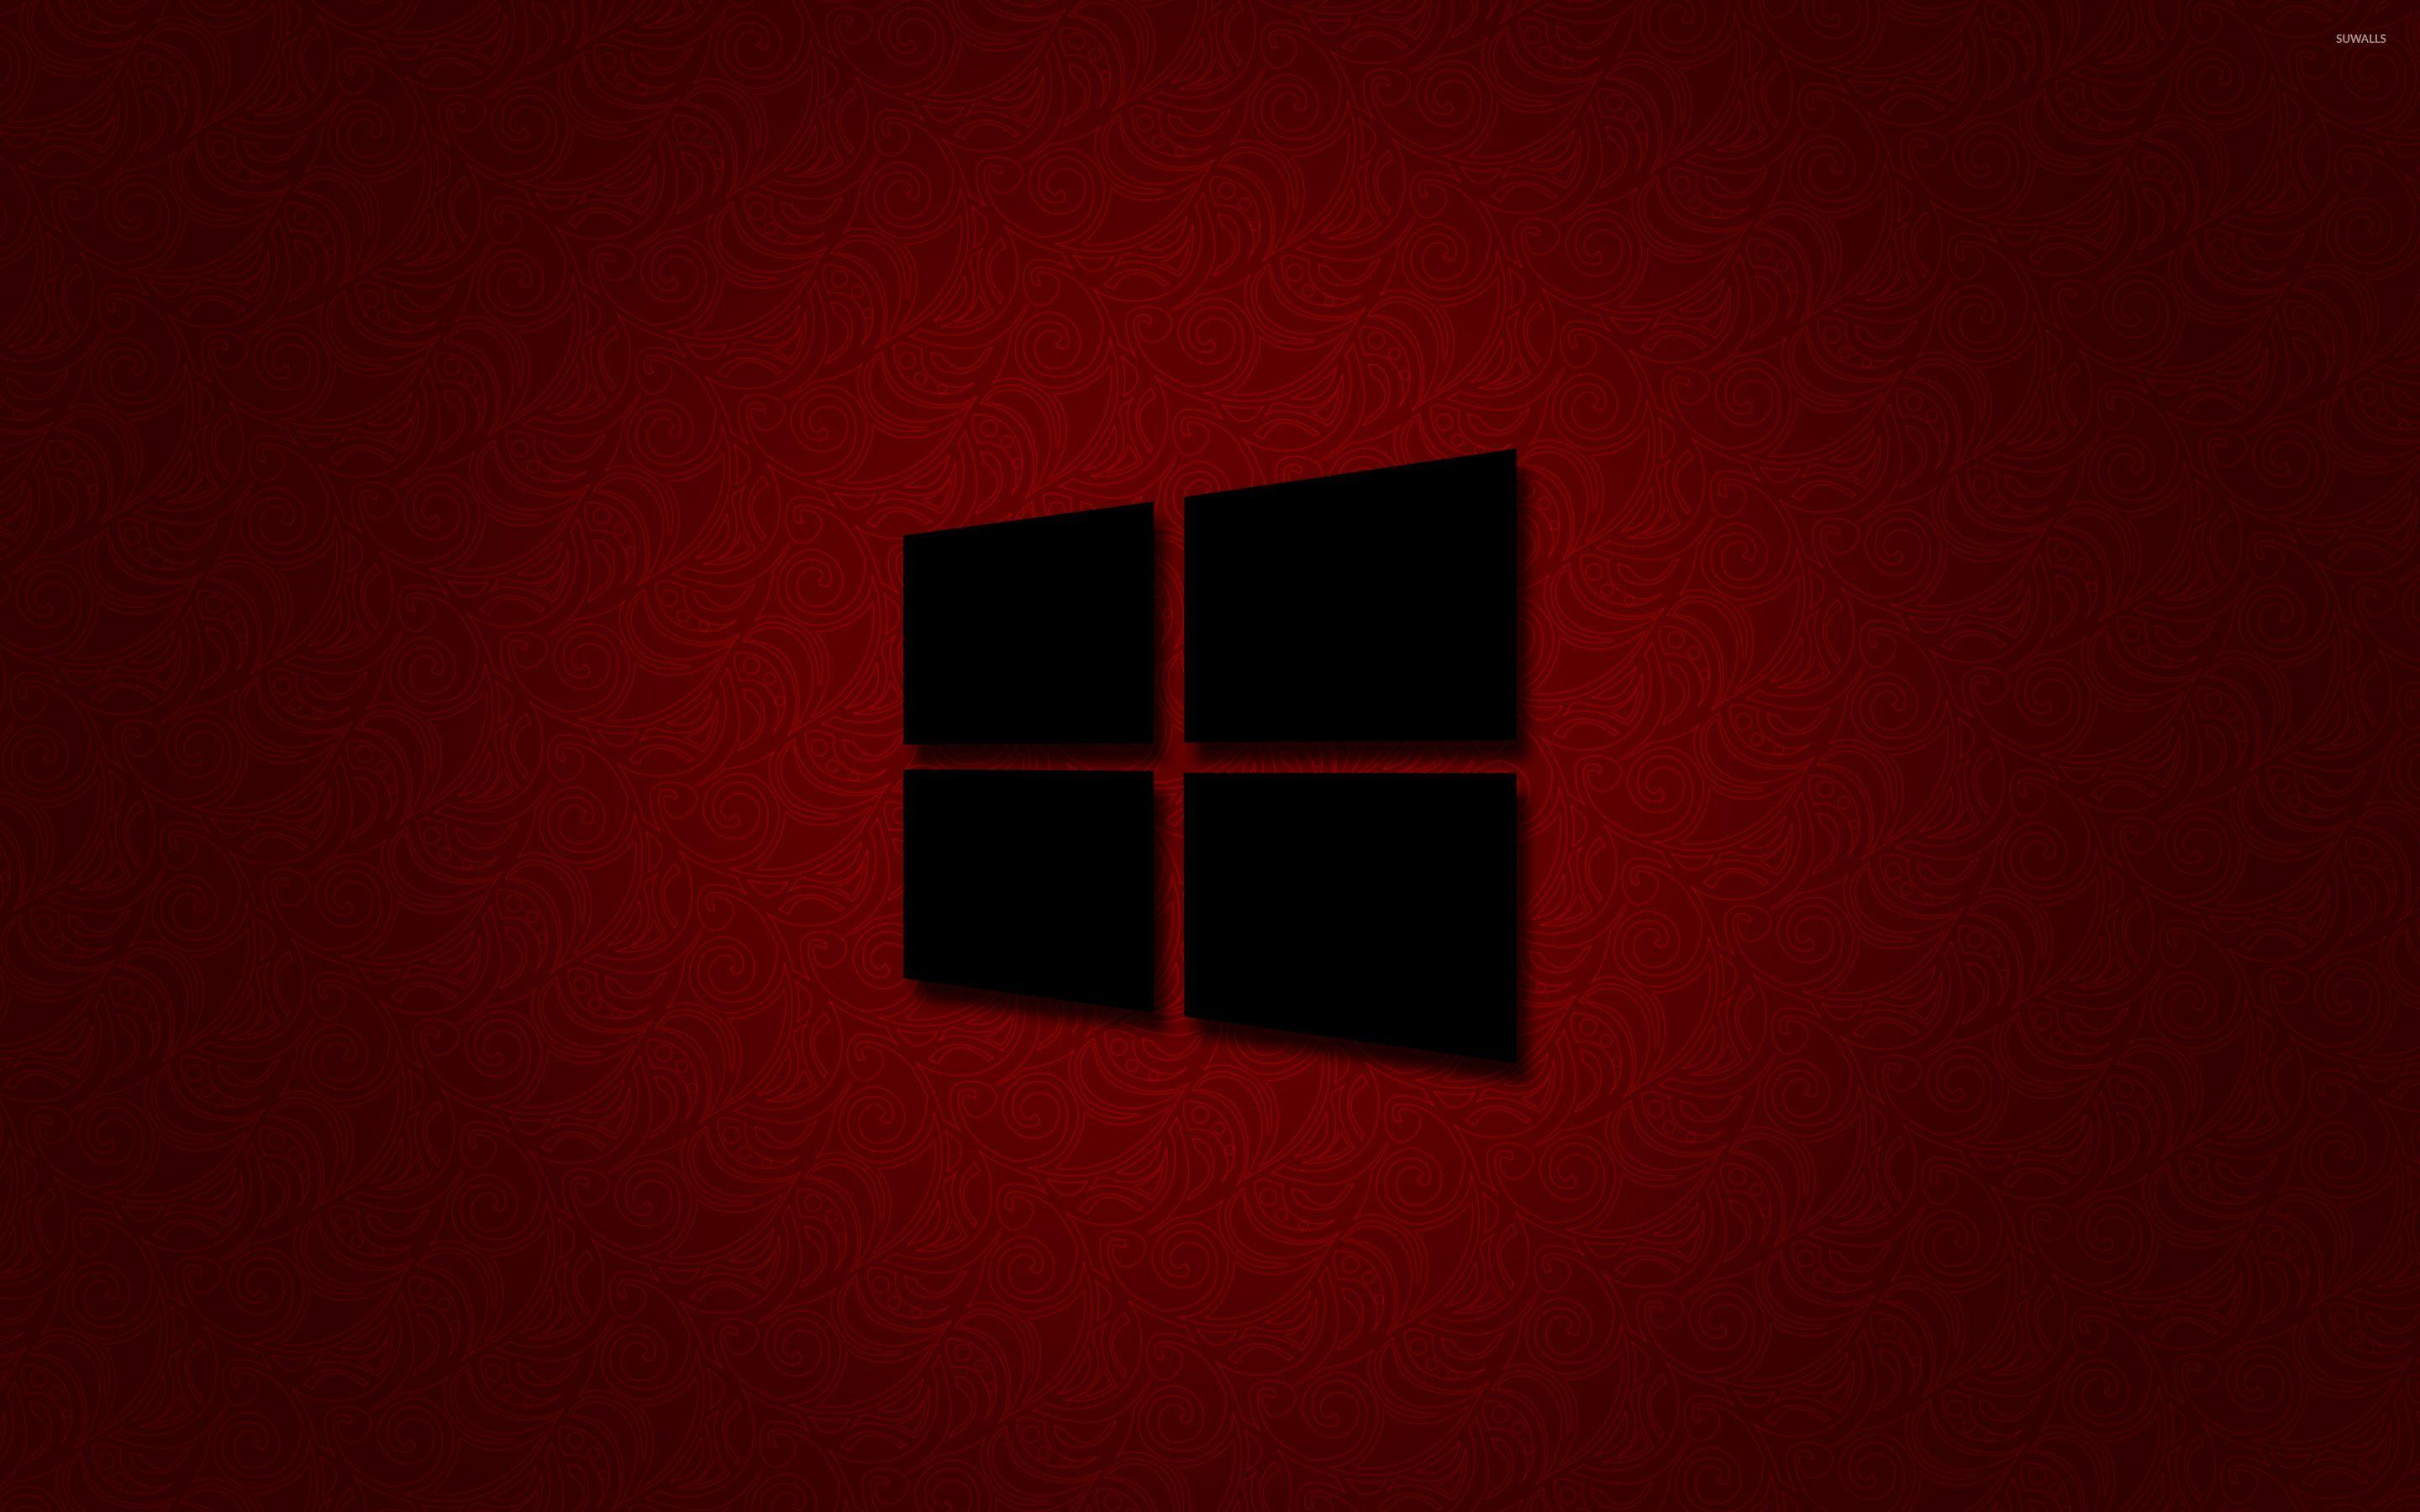 Windows 10 Red Wallpapers - Wallpaper Cave